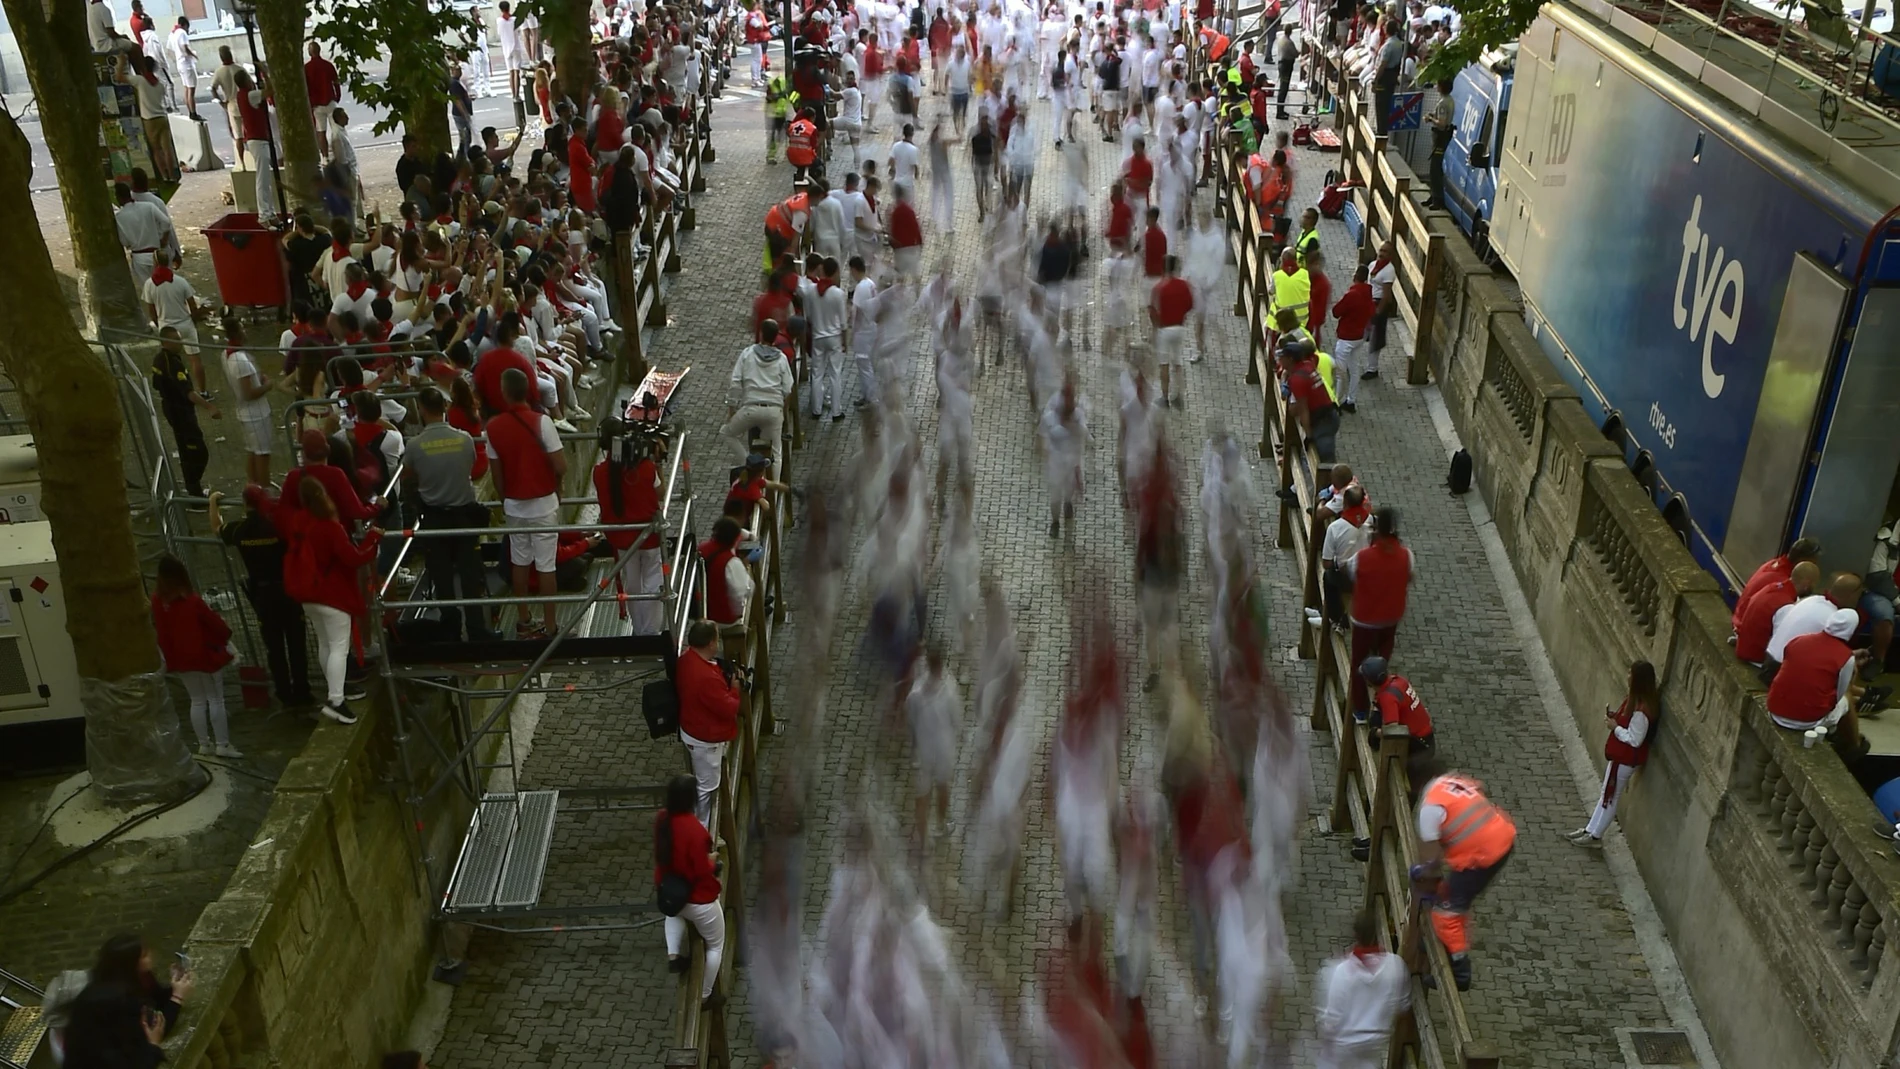 Runners stream into the bullring in this photo taken with a slow camera shutter speed during the running of the bulls at the San Fermin Festival in Pamplona, northern Spain.